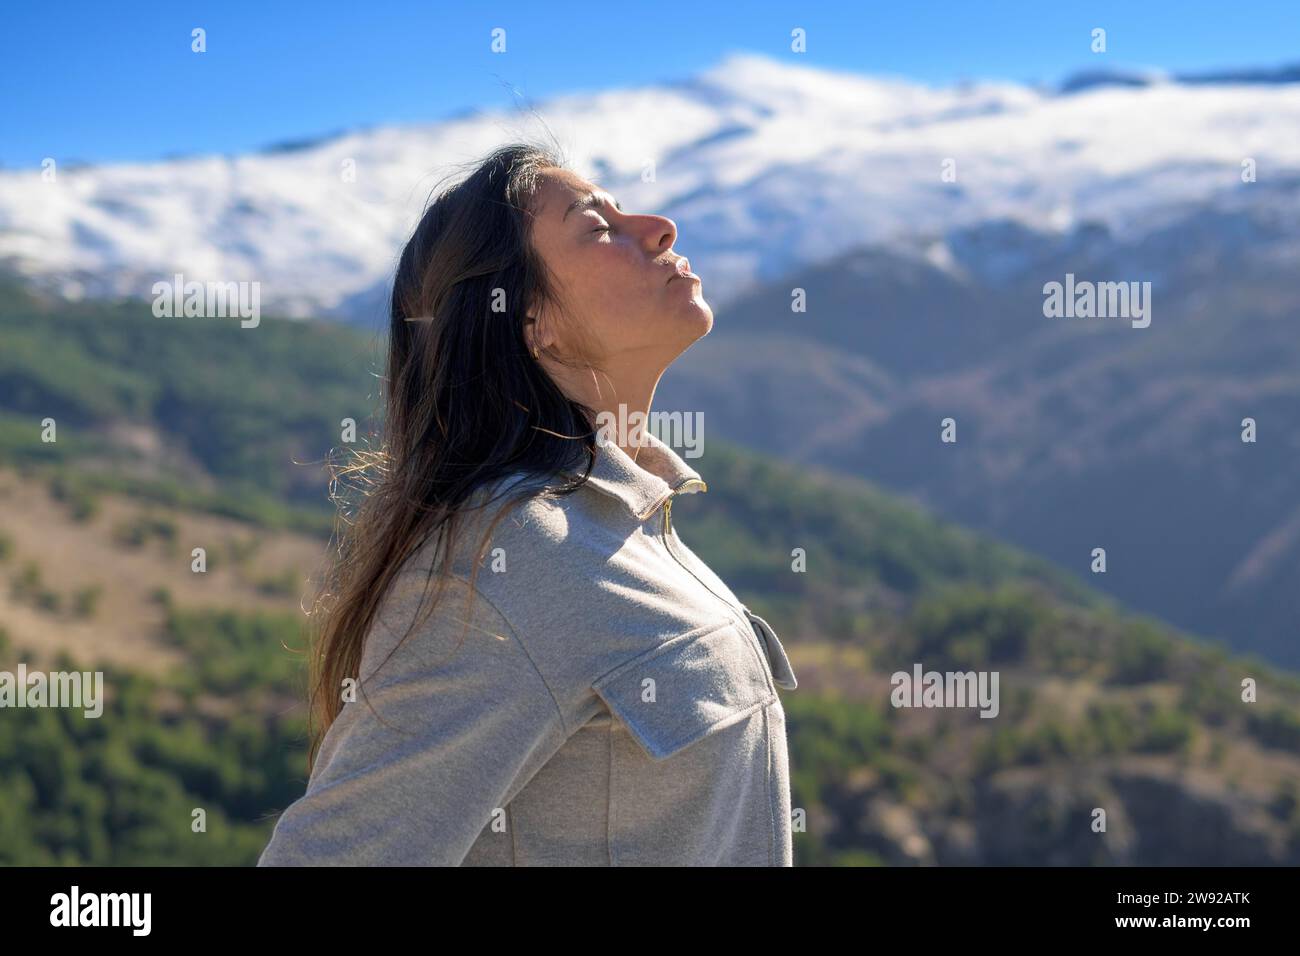 Woman in contemplation facing the sun with snow-capped mountains under a clear sky Stock Photo